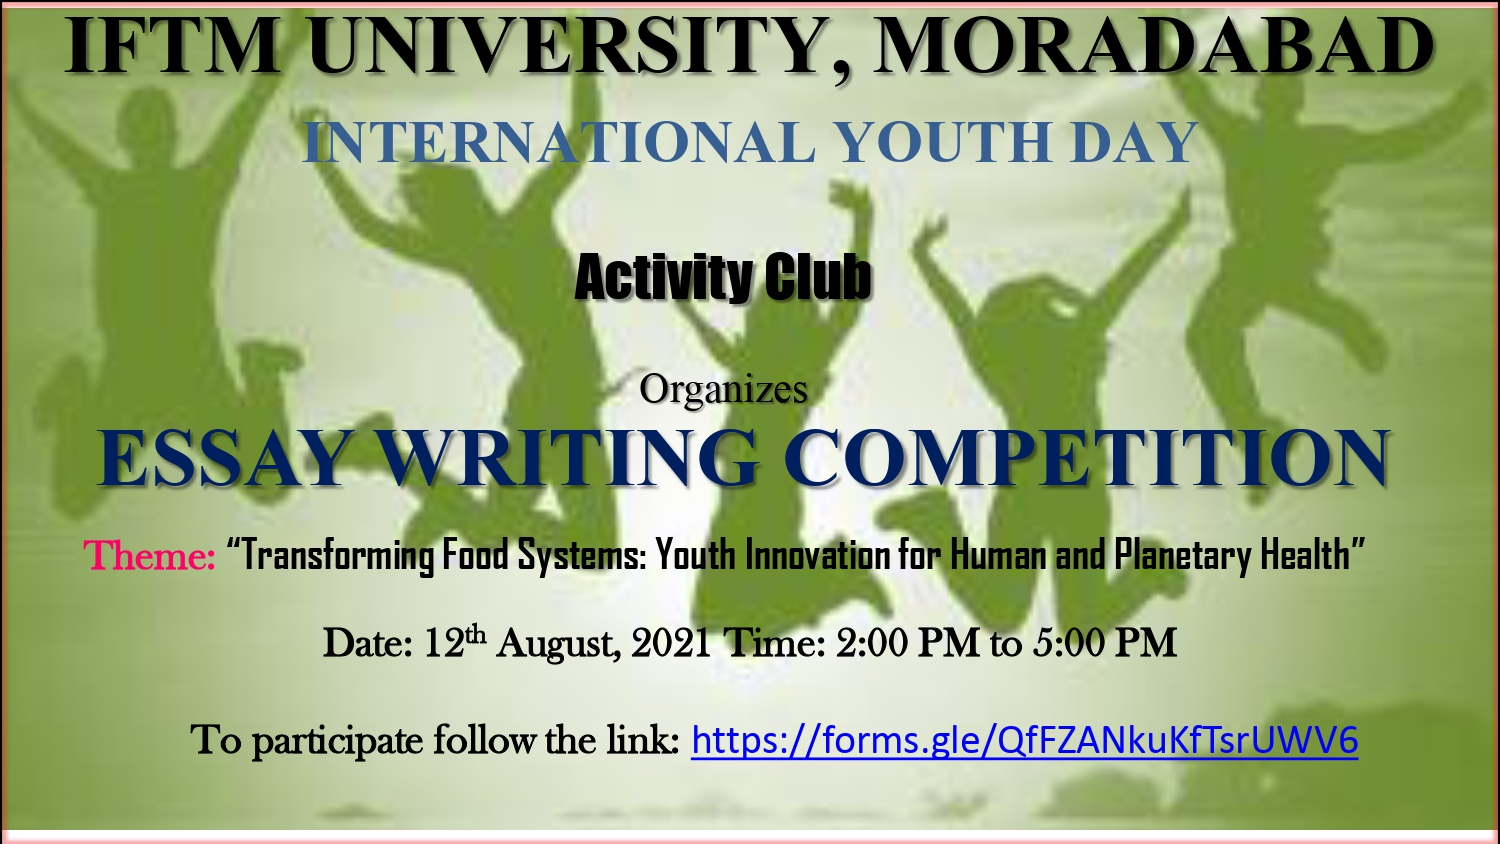 Essay Writing Competition on International Youth Day